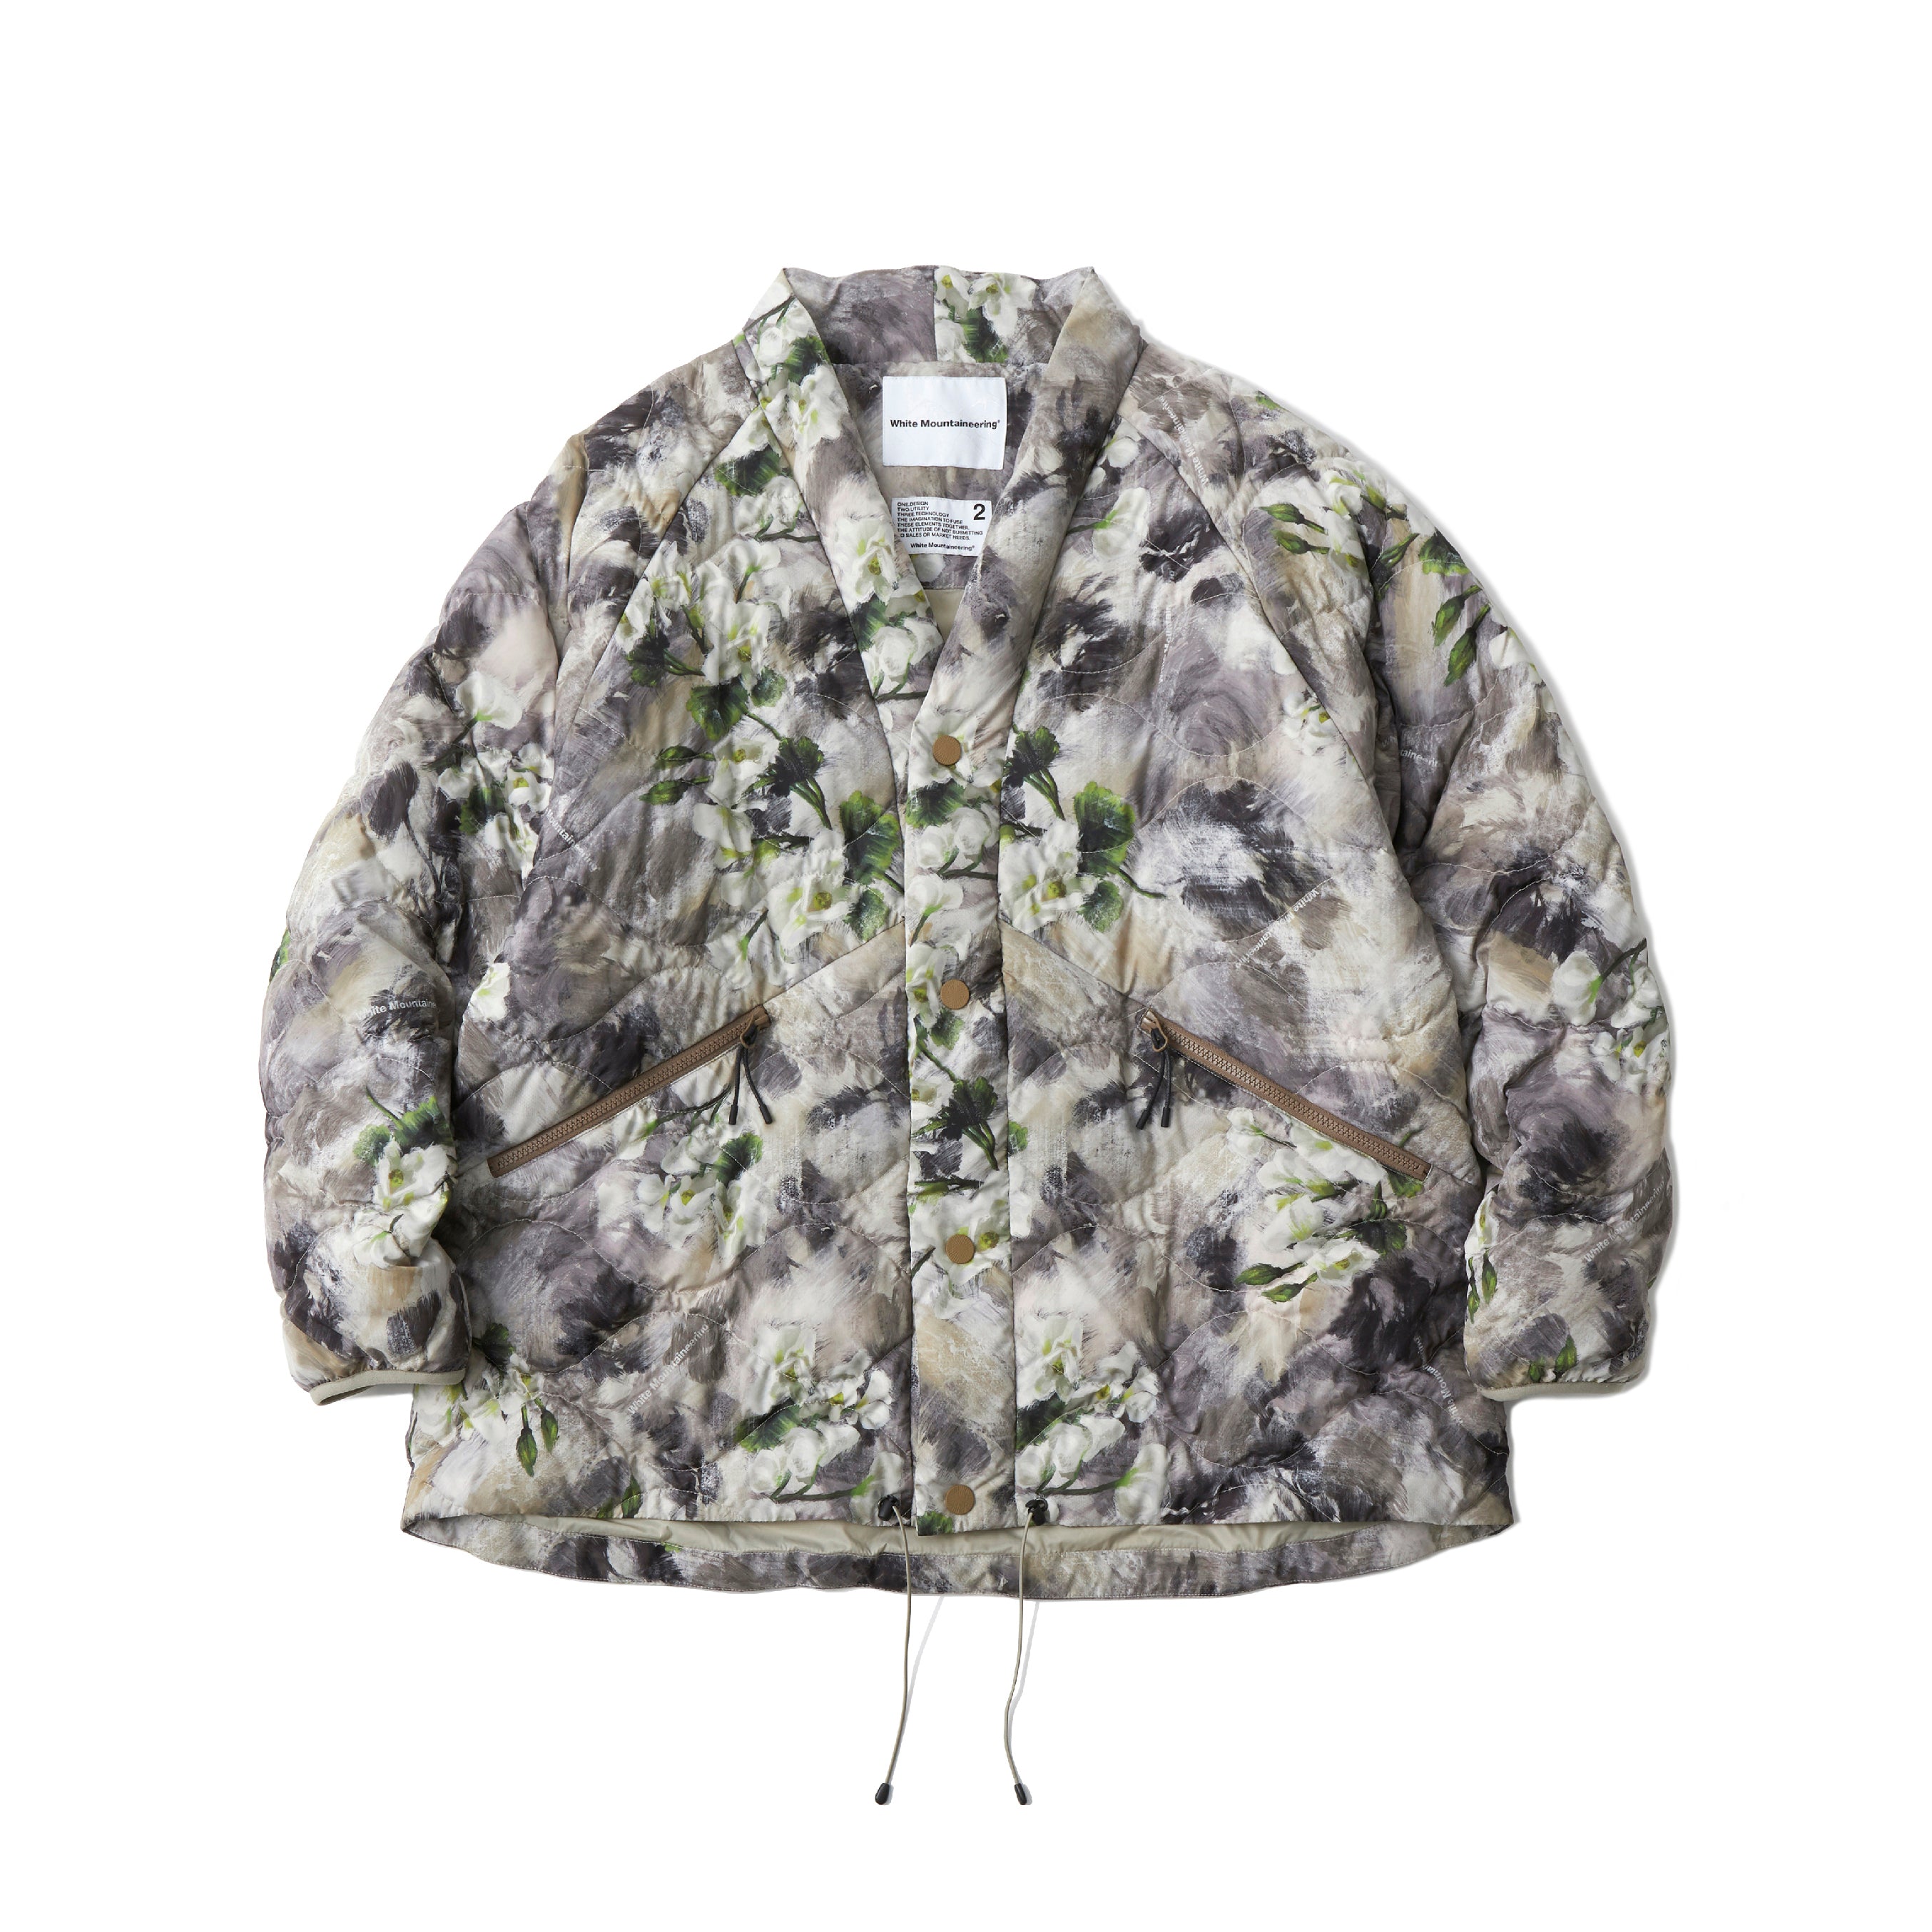 WM × TAION FLORAL QUILTED HANTEN – White Mountaineering OFFICIAL